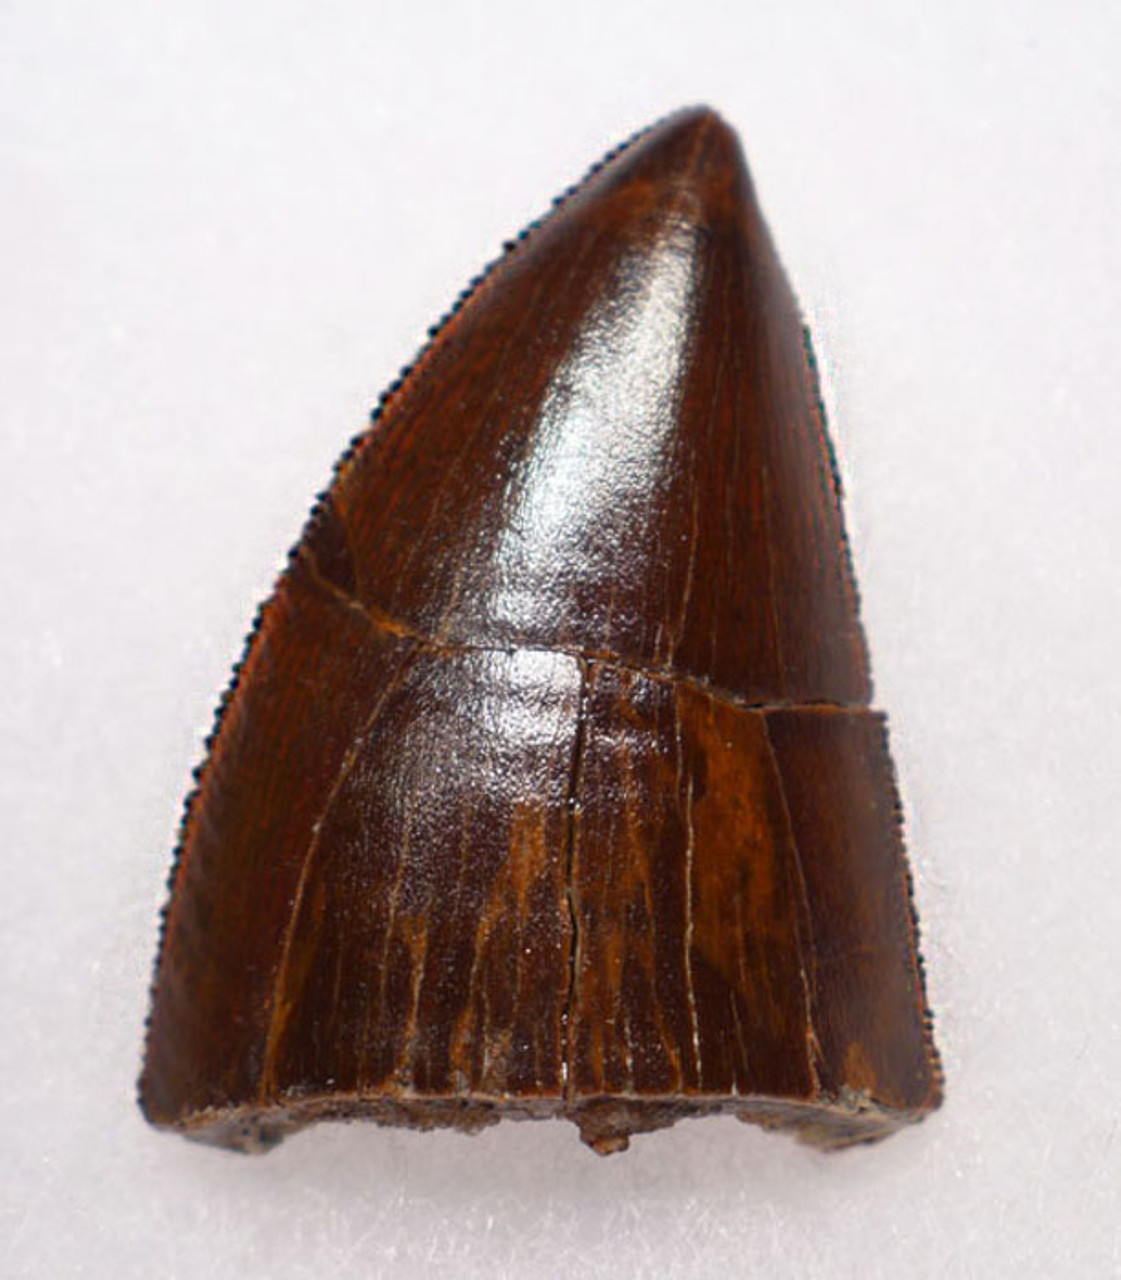 DT2-061 - PARTIAL LARGE CARCHARODONTOSAURUS DINOSAUR TOOTH WITH SHARP TIP AND SERRATIONS